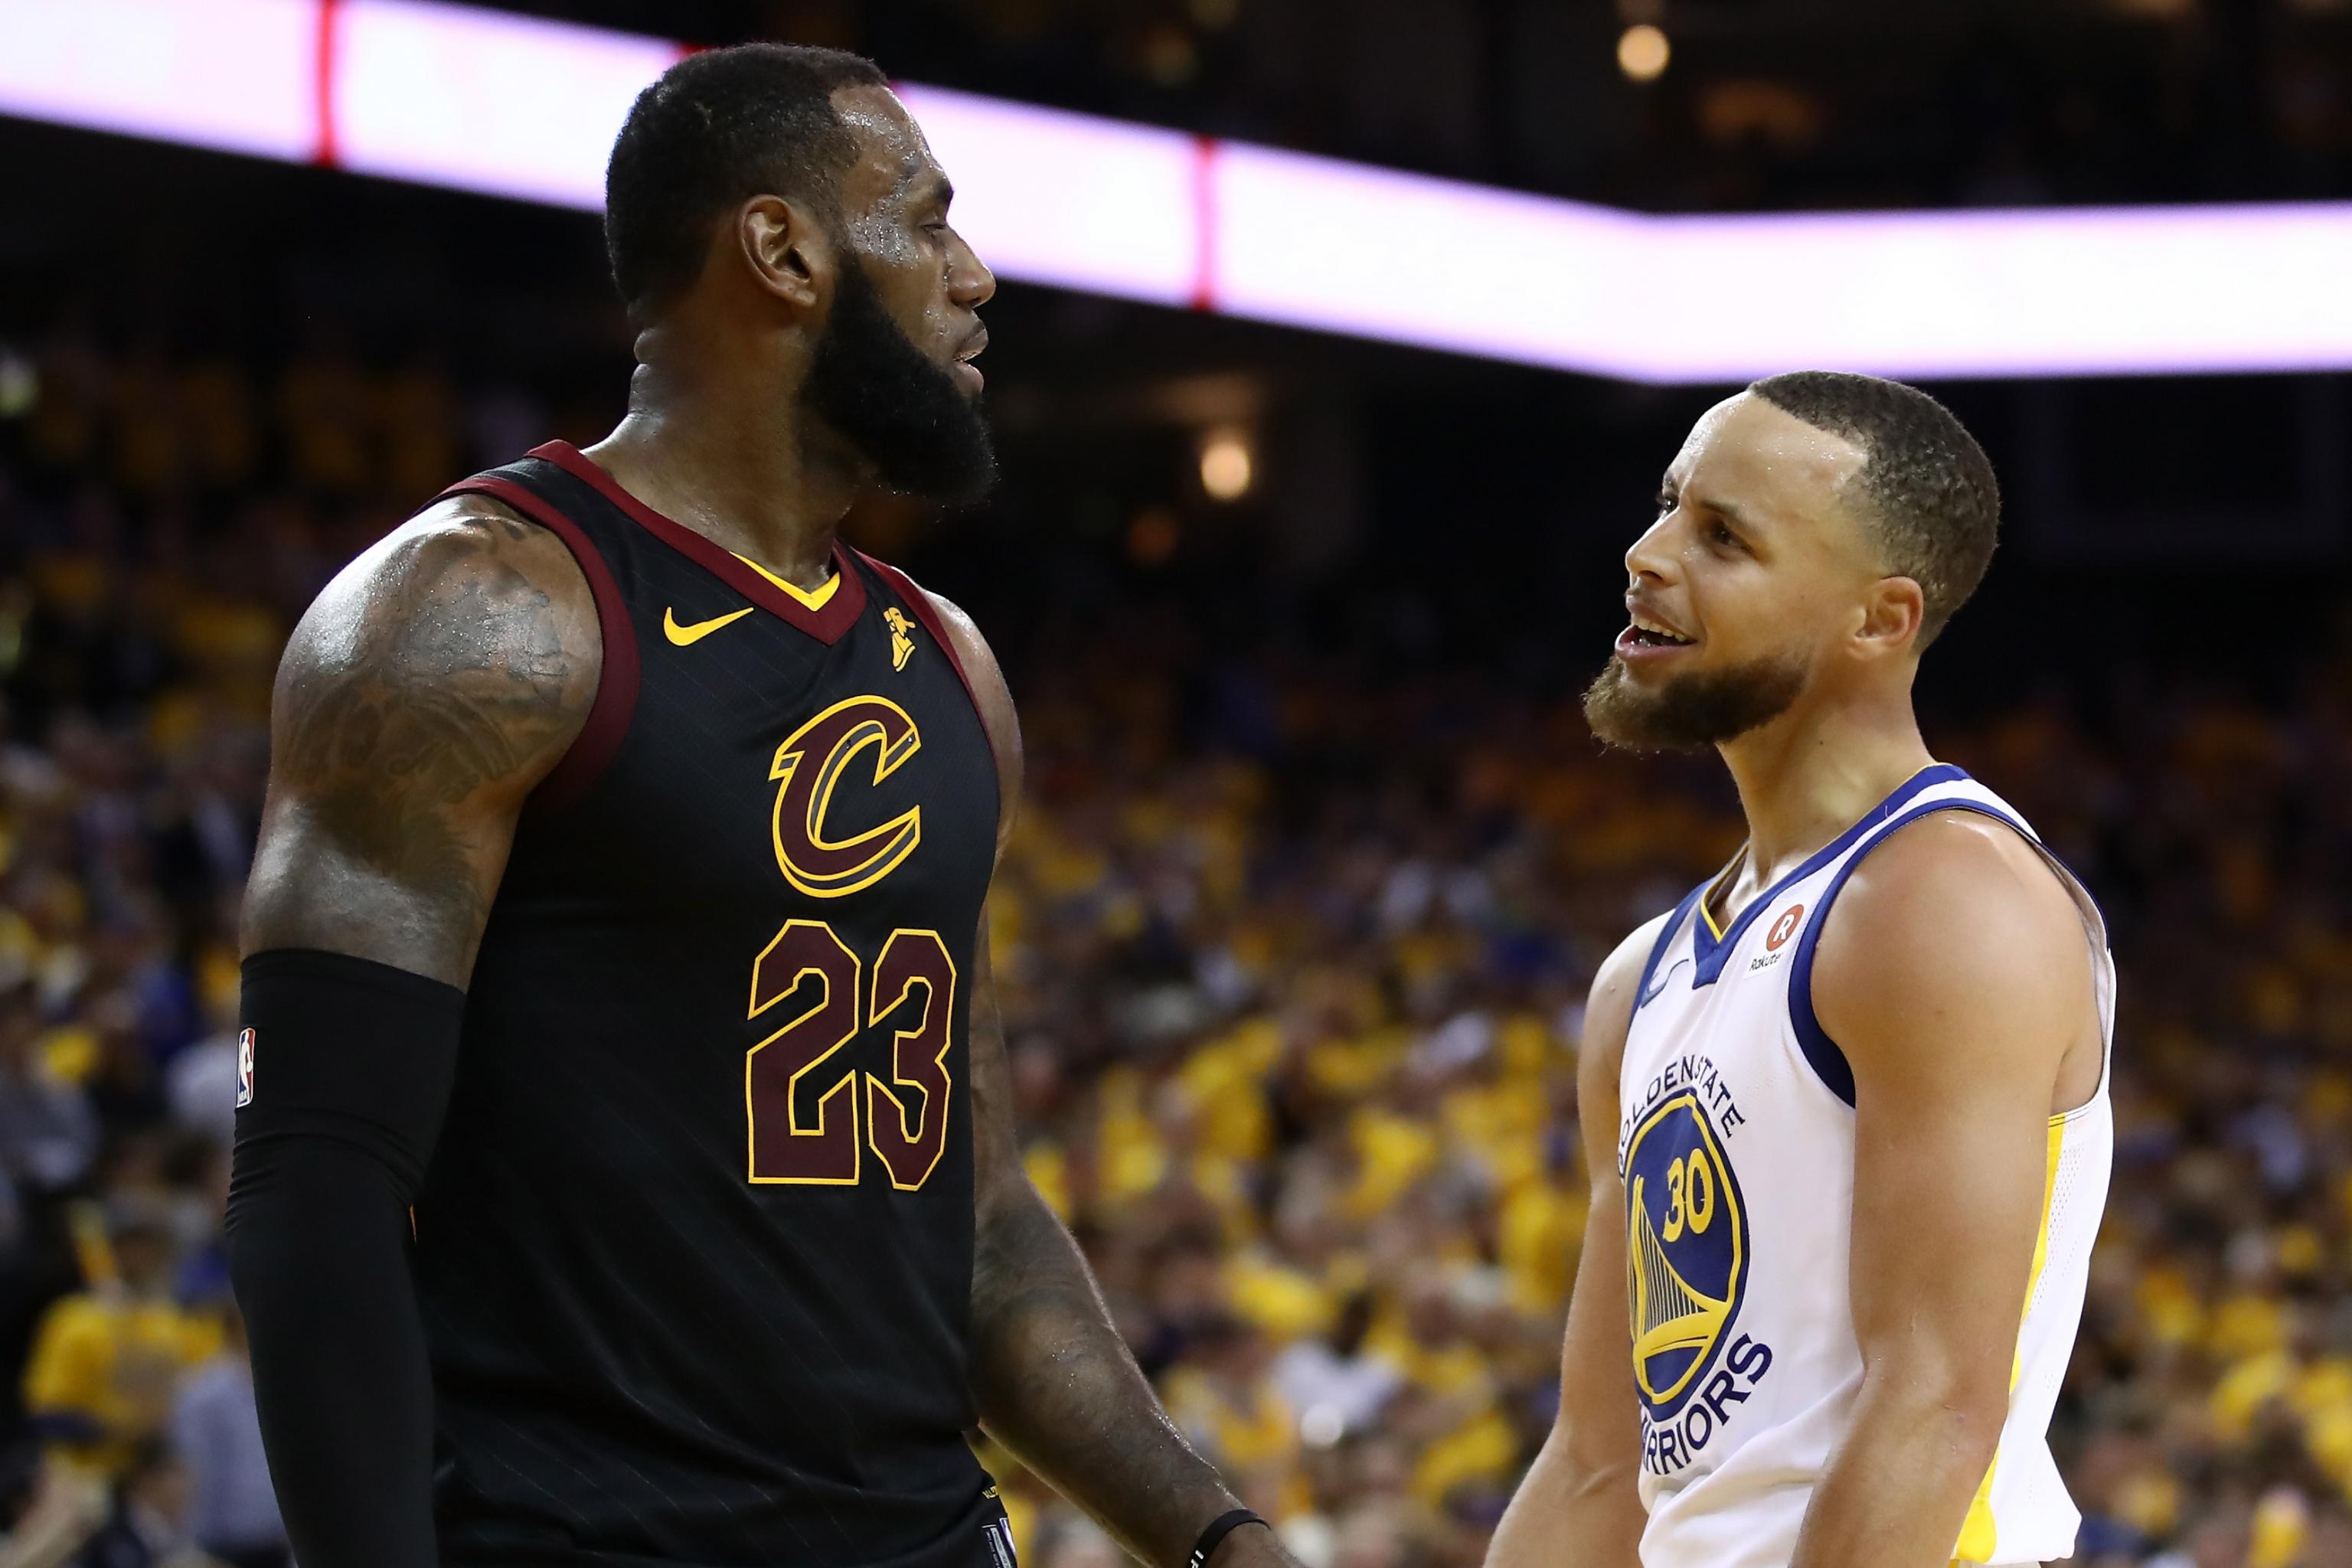 Cavaliers Vs Warriors Postgame Sound From Game 1 Of 2018 Nba Finals Bleacher Report Latest News Videos And Highlights